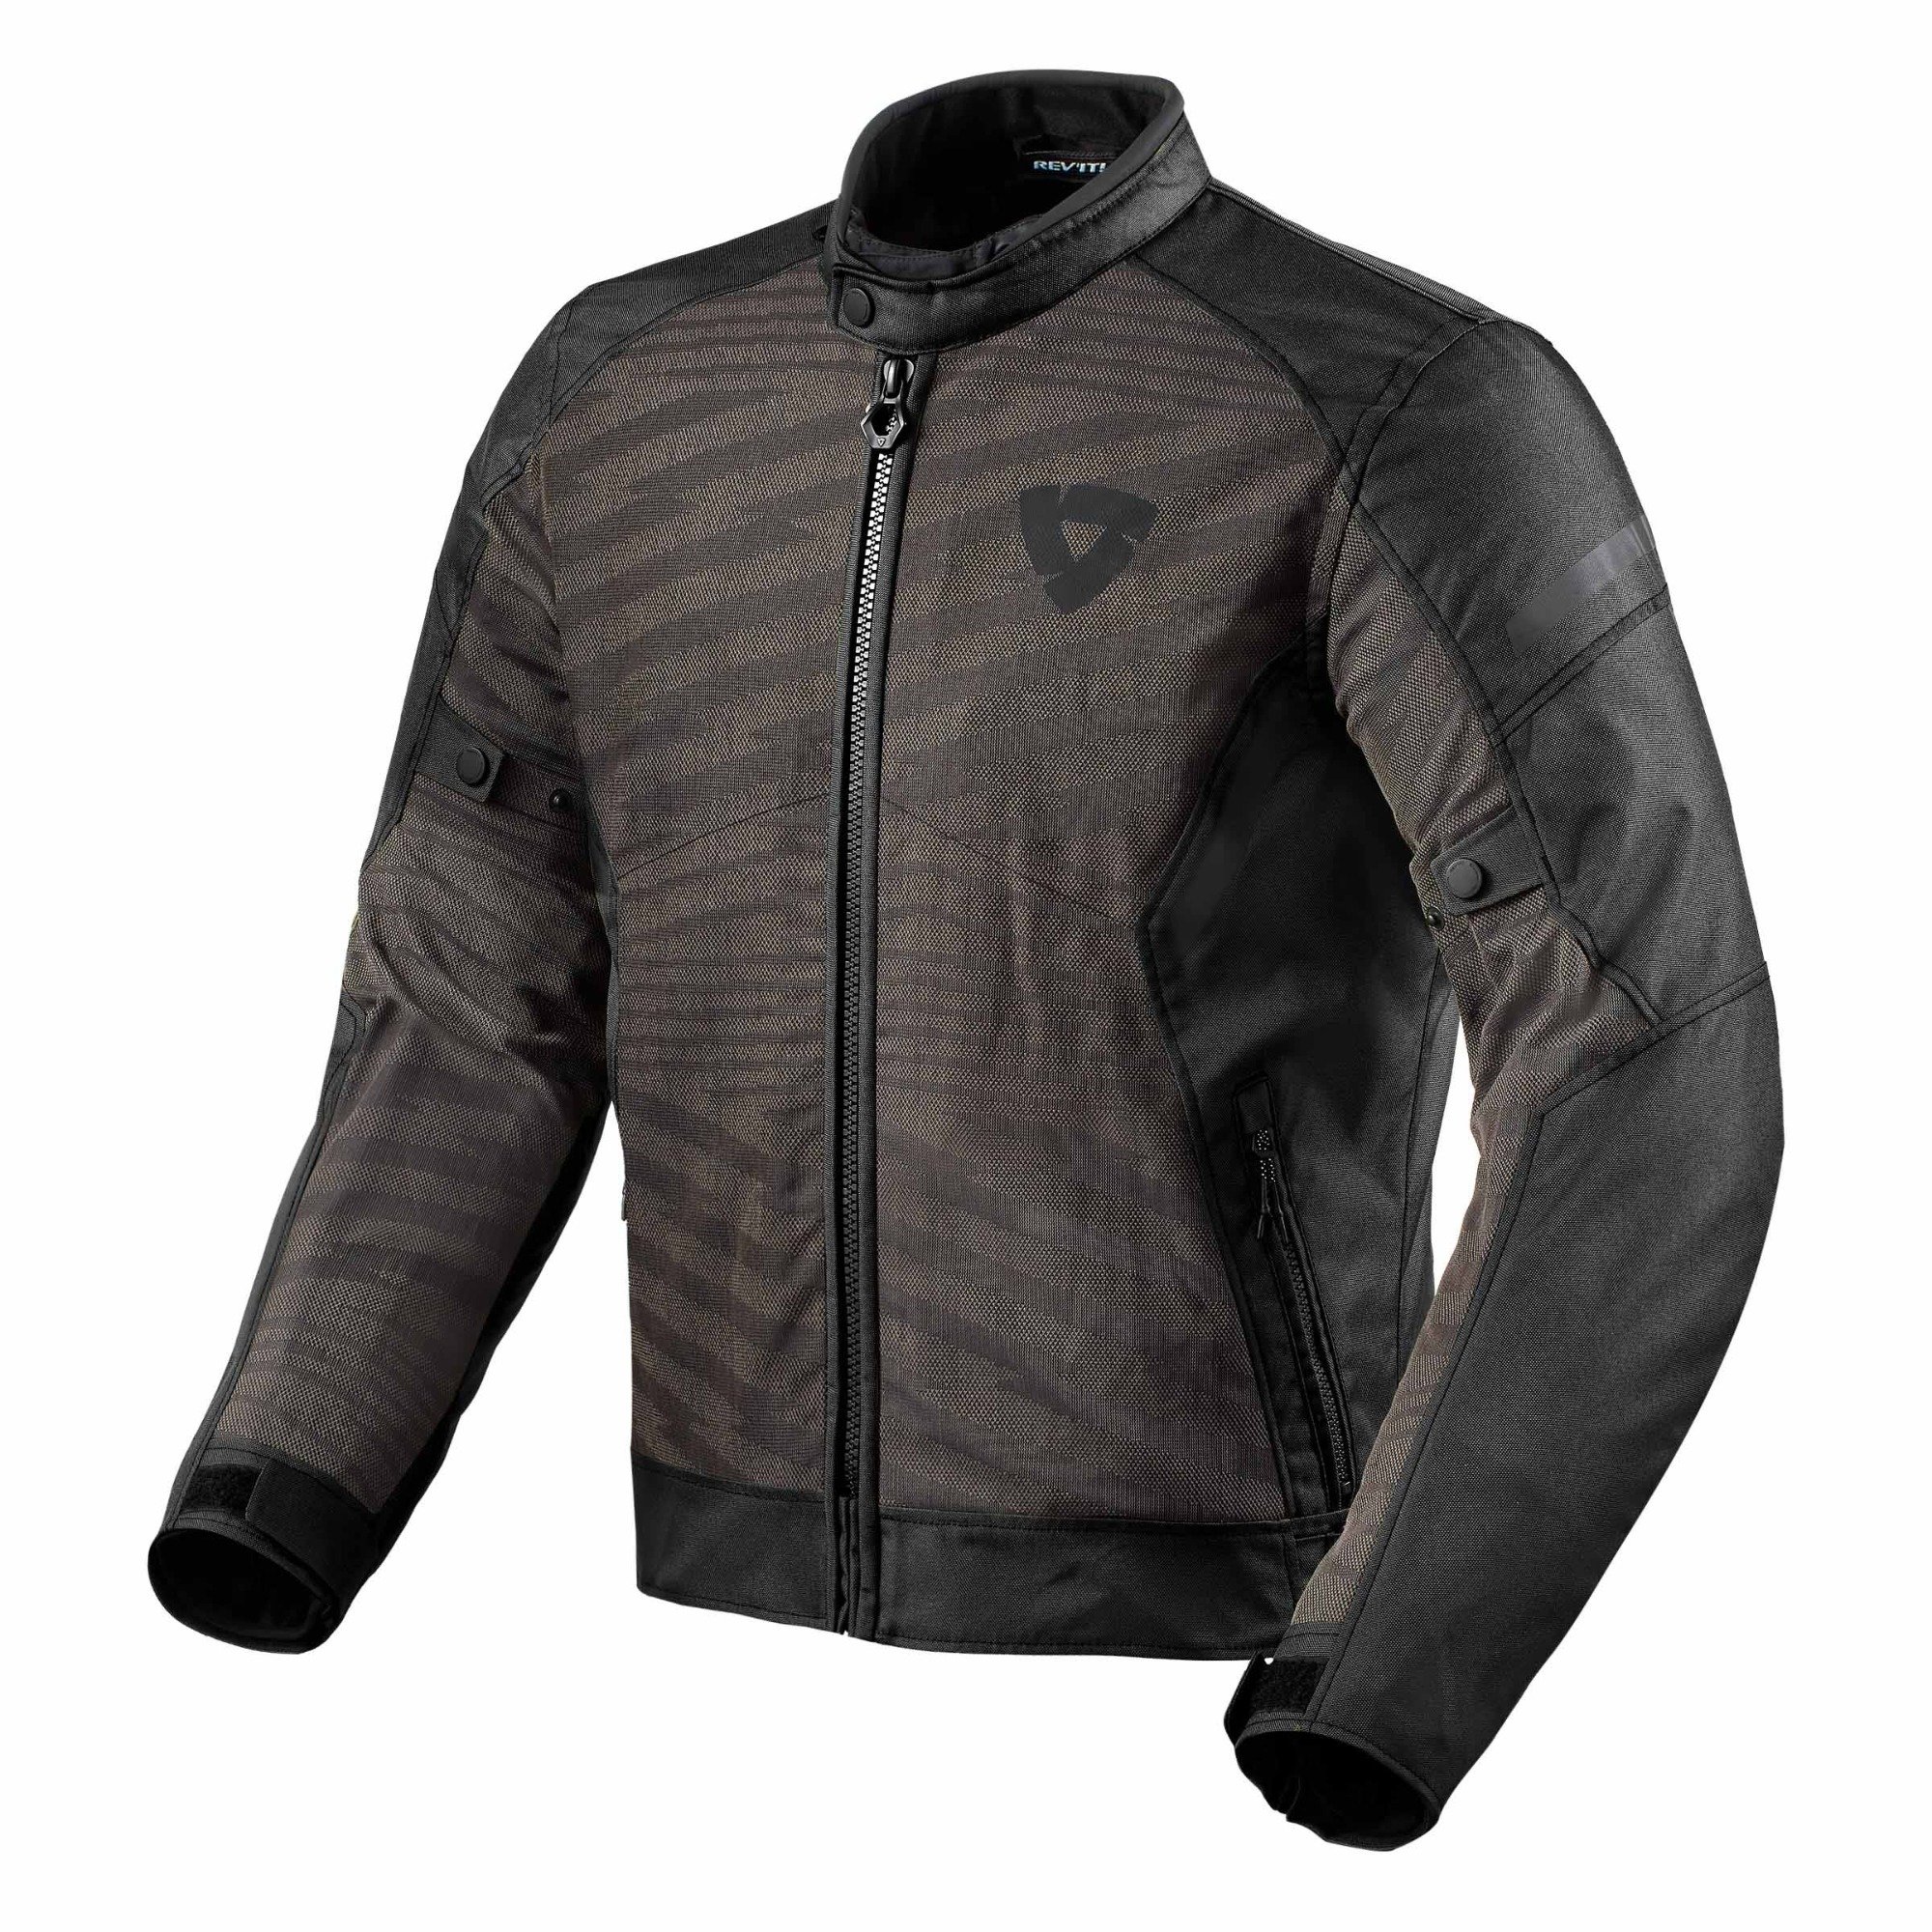 Image of REV'IT! Torque 2 H2O Jacket Black Anthracite Size S ID 8700001333863